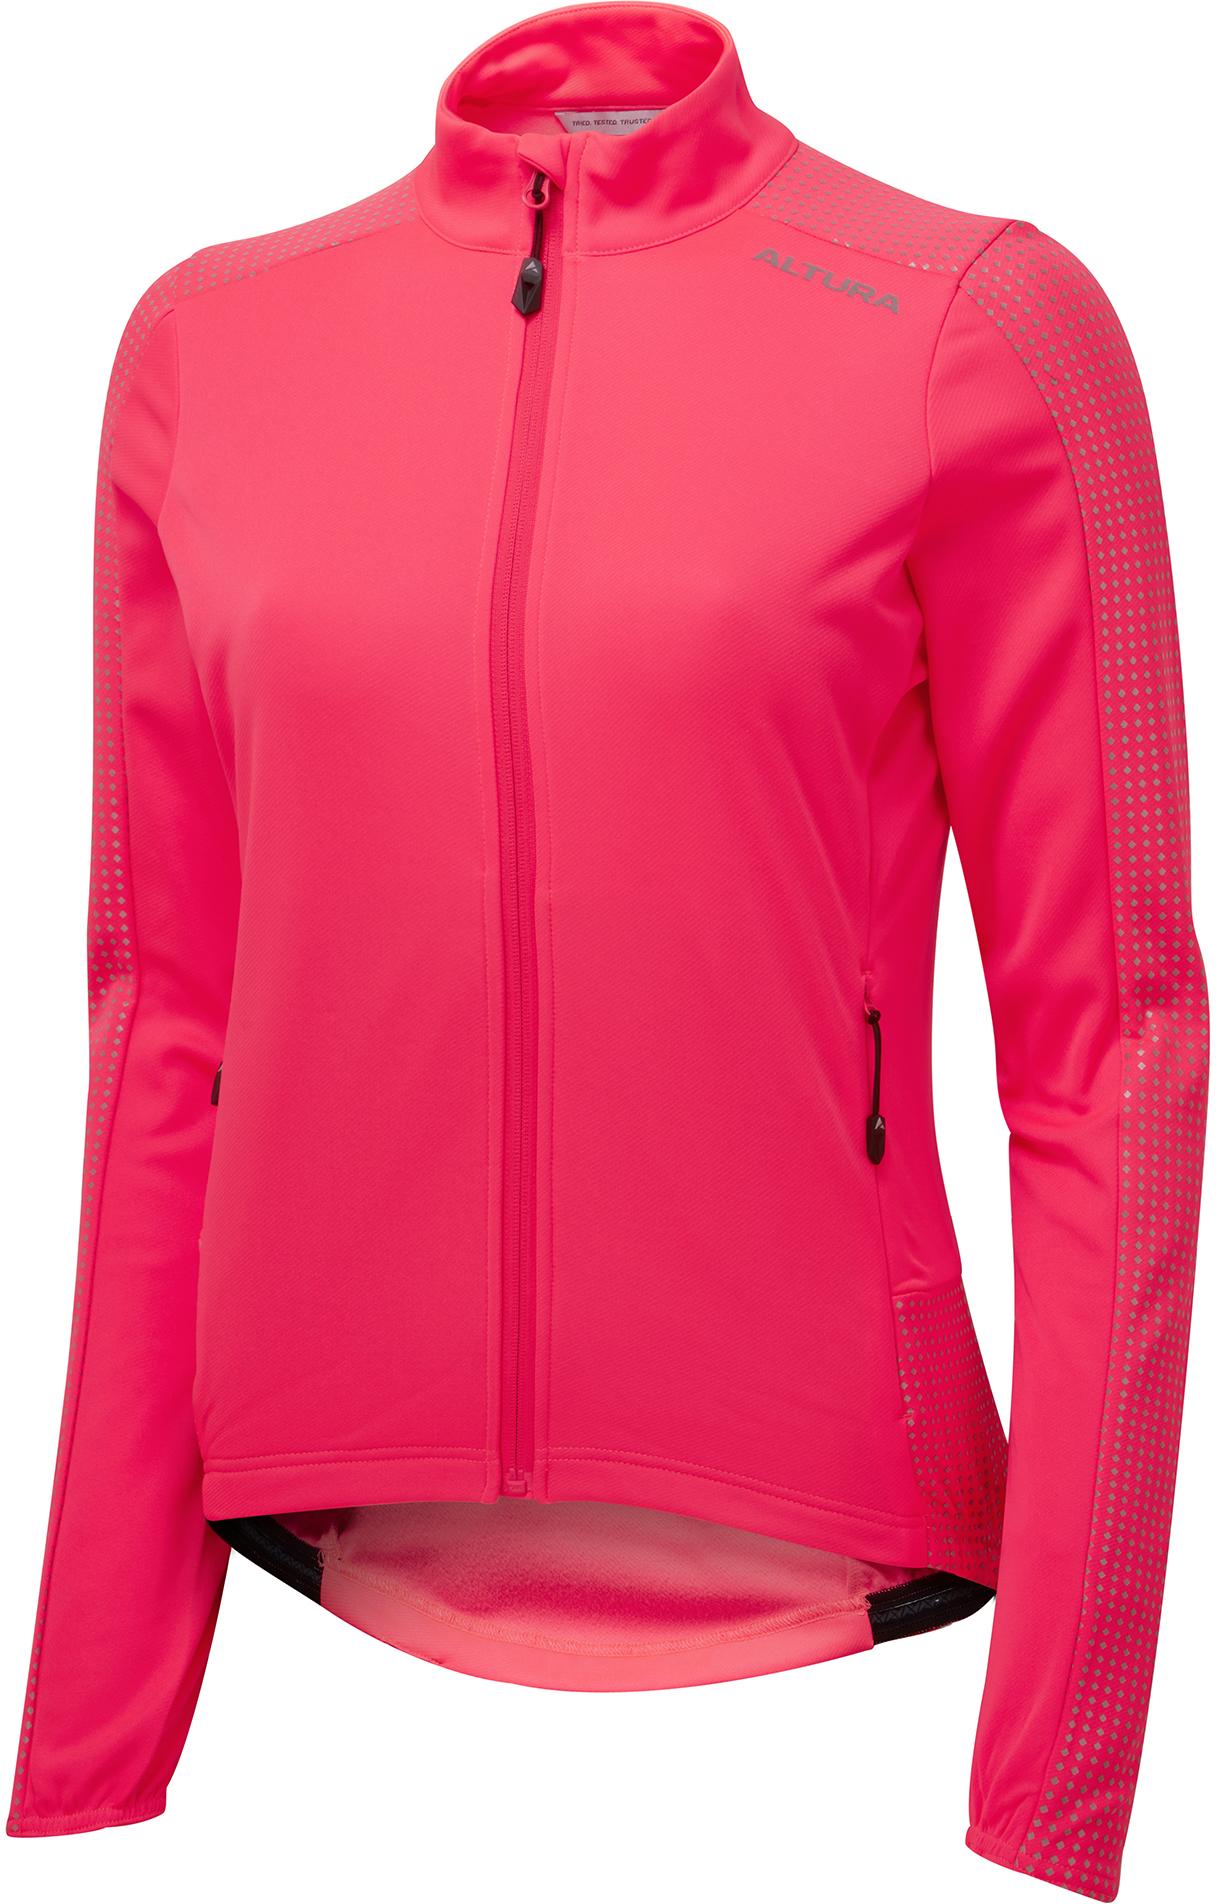 Altura Nightvision Women's Long Sleeve Jersey Pink 16